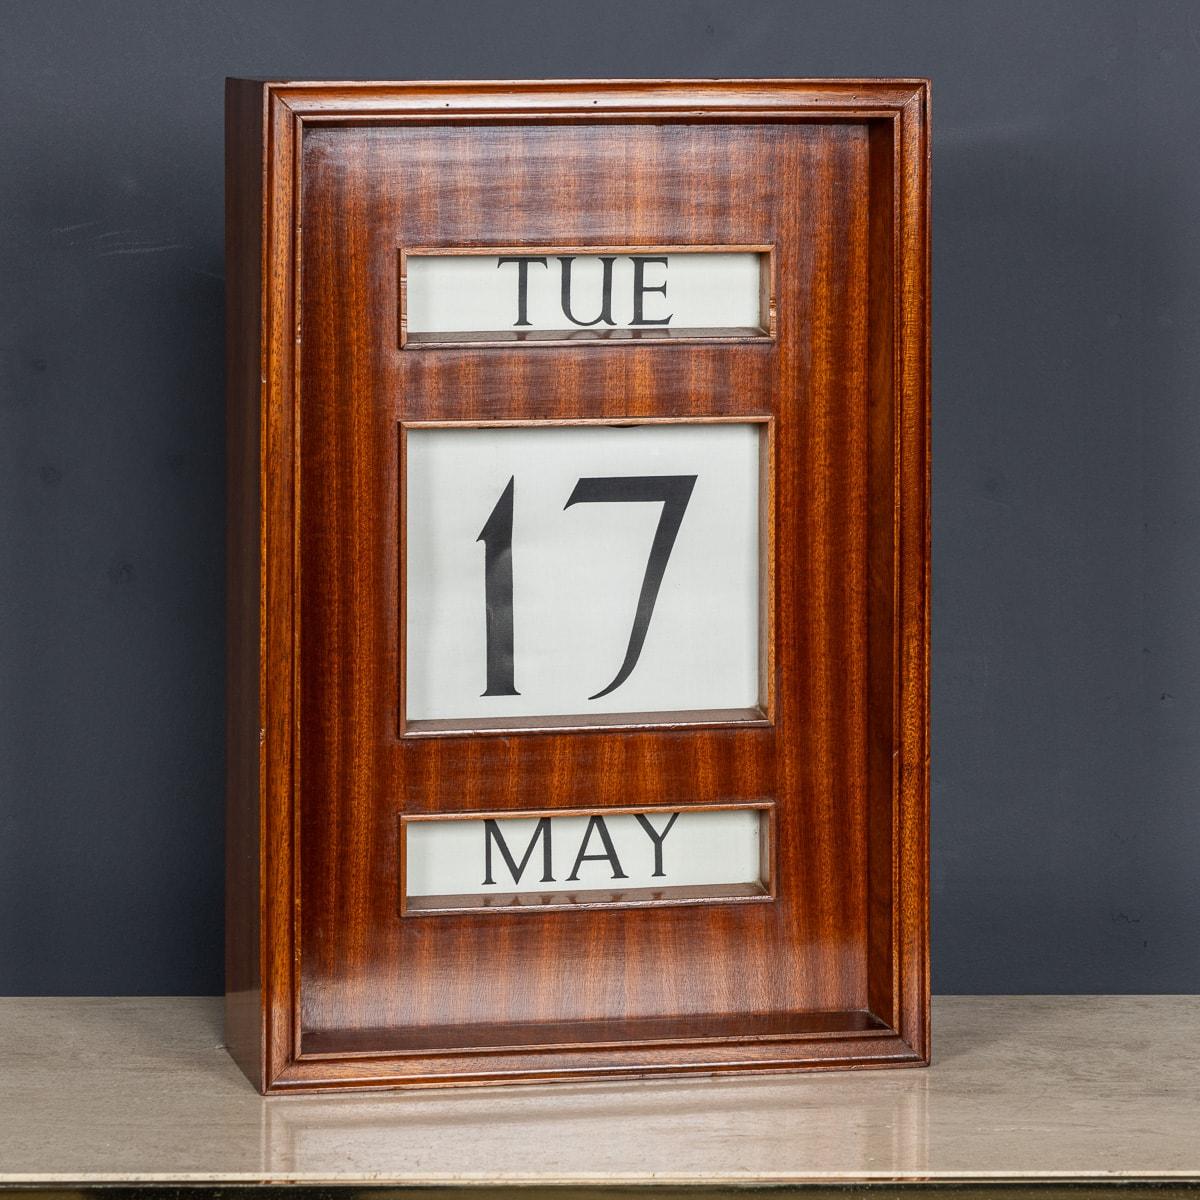 Vintage 20th Century perpetual desk calendar, made from striped wood. There is a small hinged door to one side revealing six knobs, these are used to move forward and rewind the day, date and month behind three glazed apertures. On the rear, two